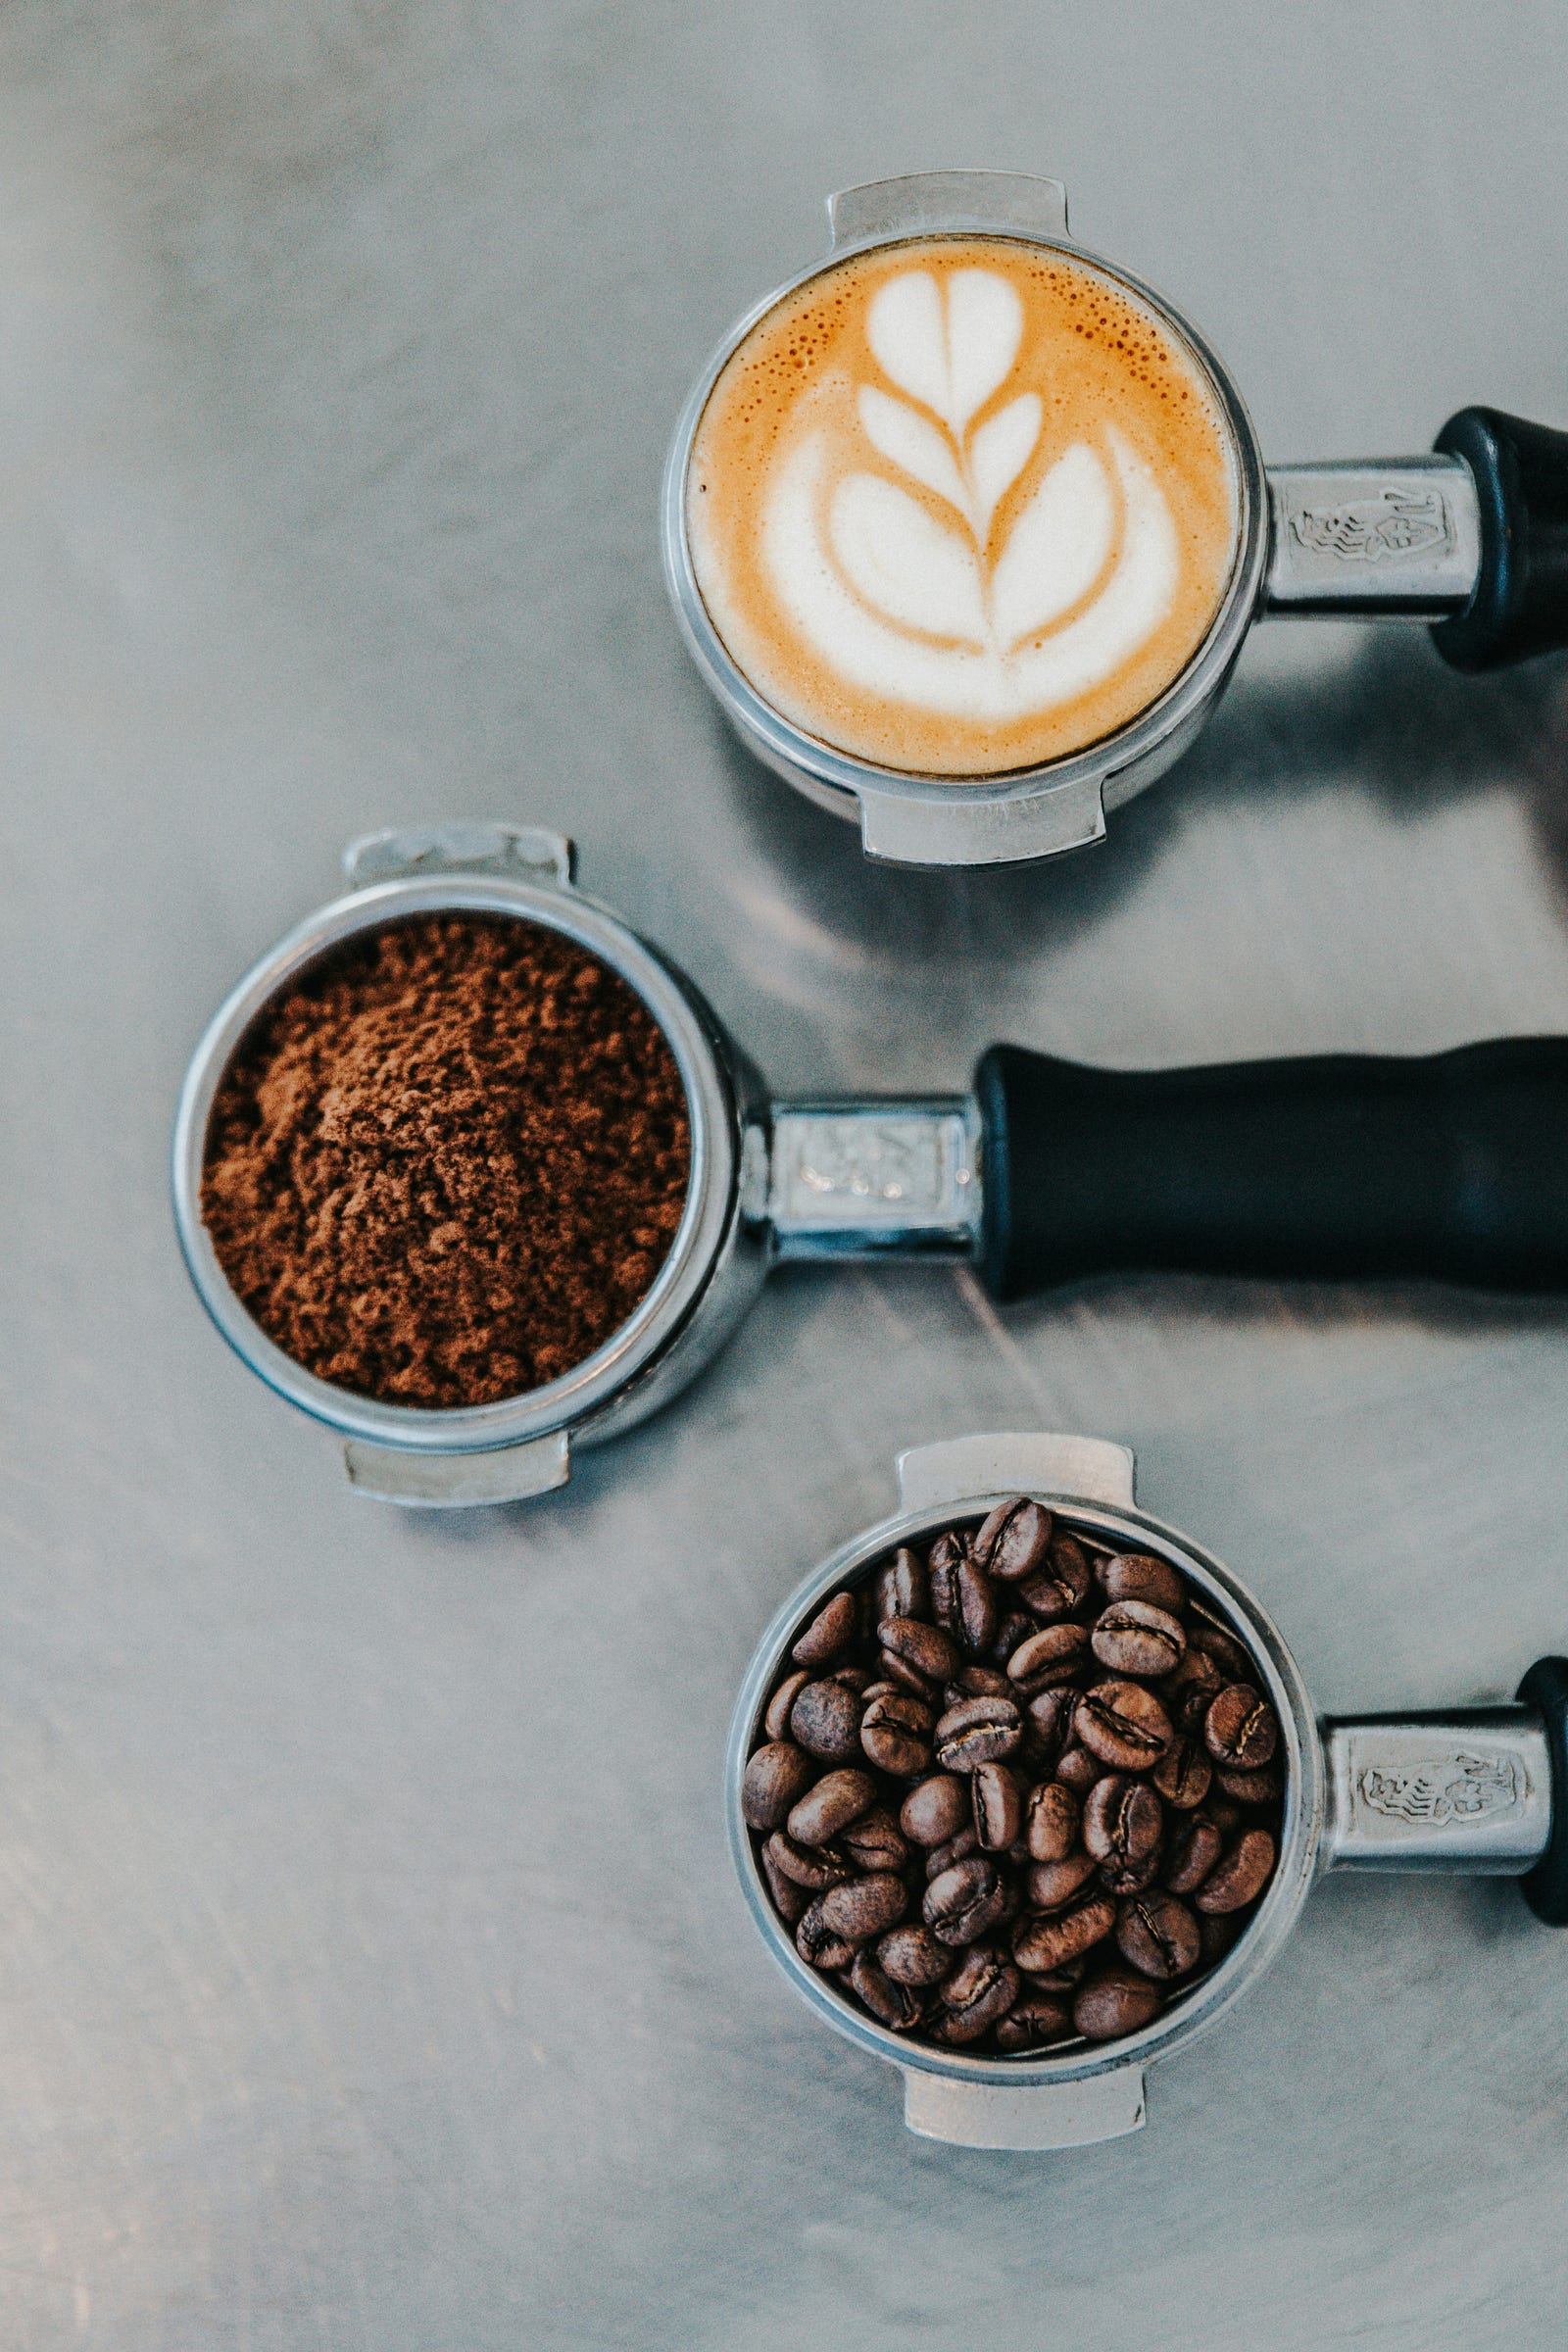 Three small devices hold coffee, ready to be inserted into a grinding machine. Coffee may lower the risk of colorectal cancer patients dying from the disease.